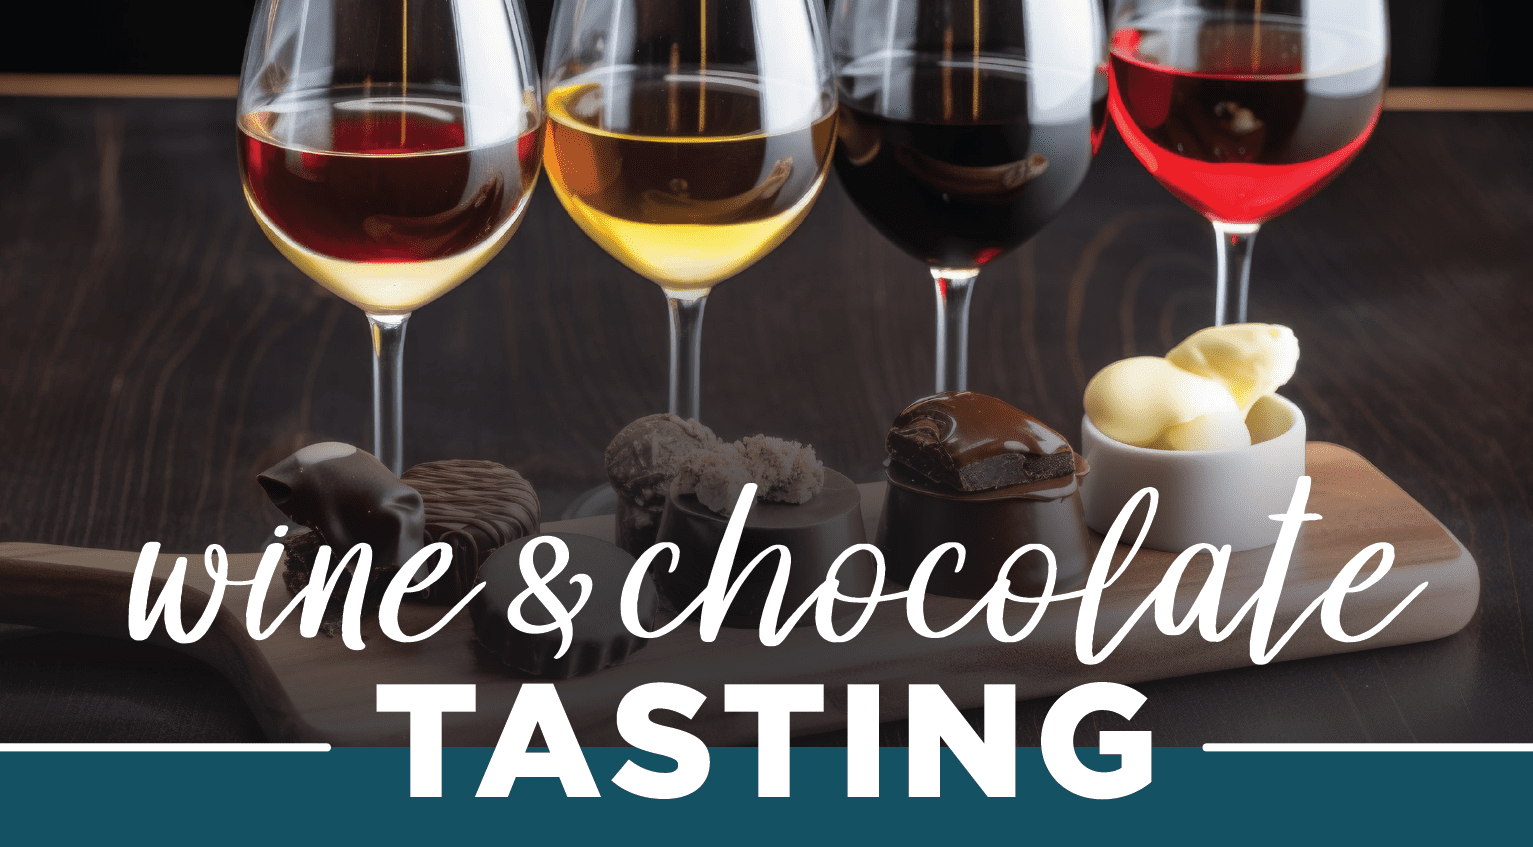 Reach Out and Read Colorado Wine & Chocolate Tasting Event